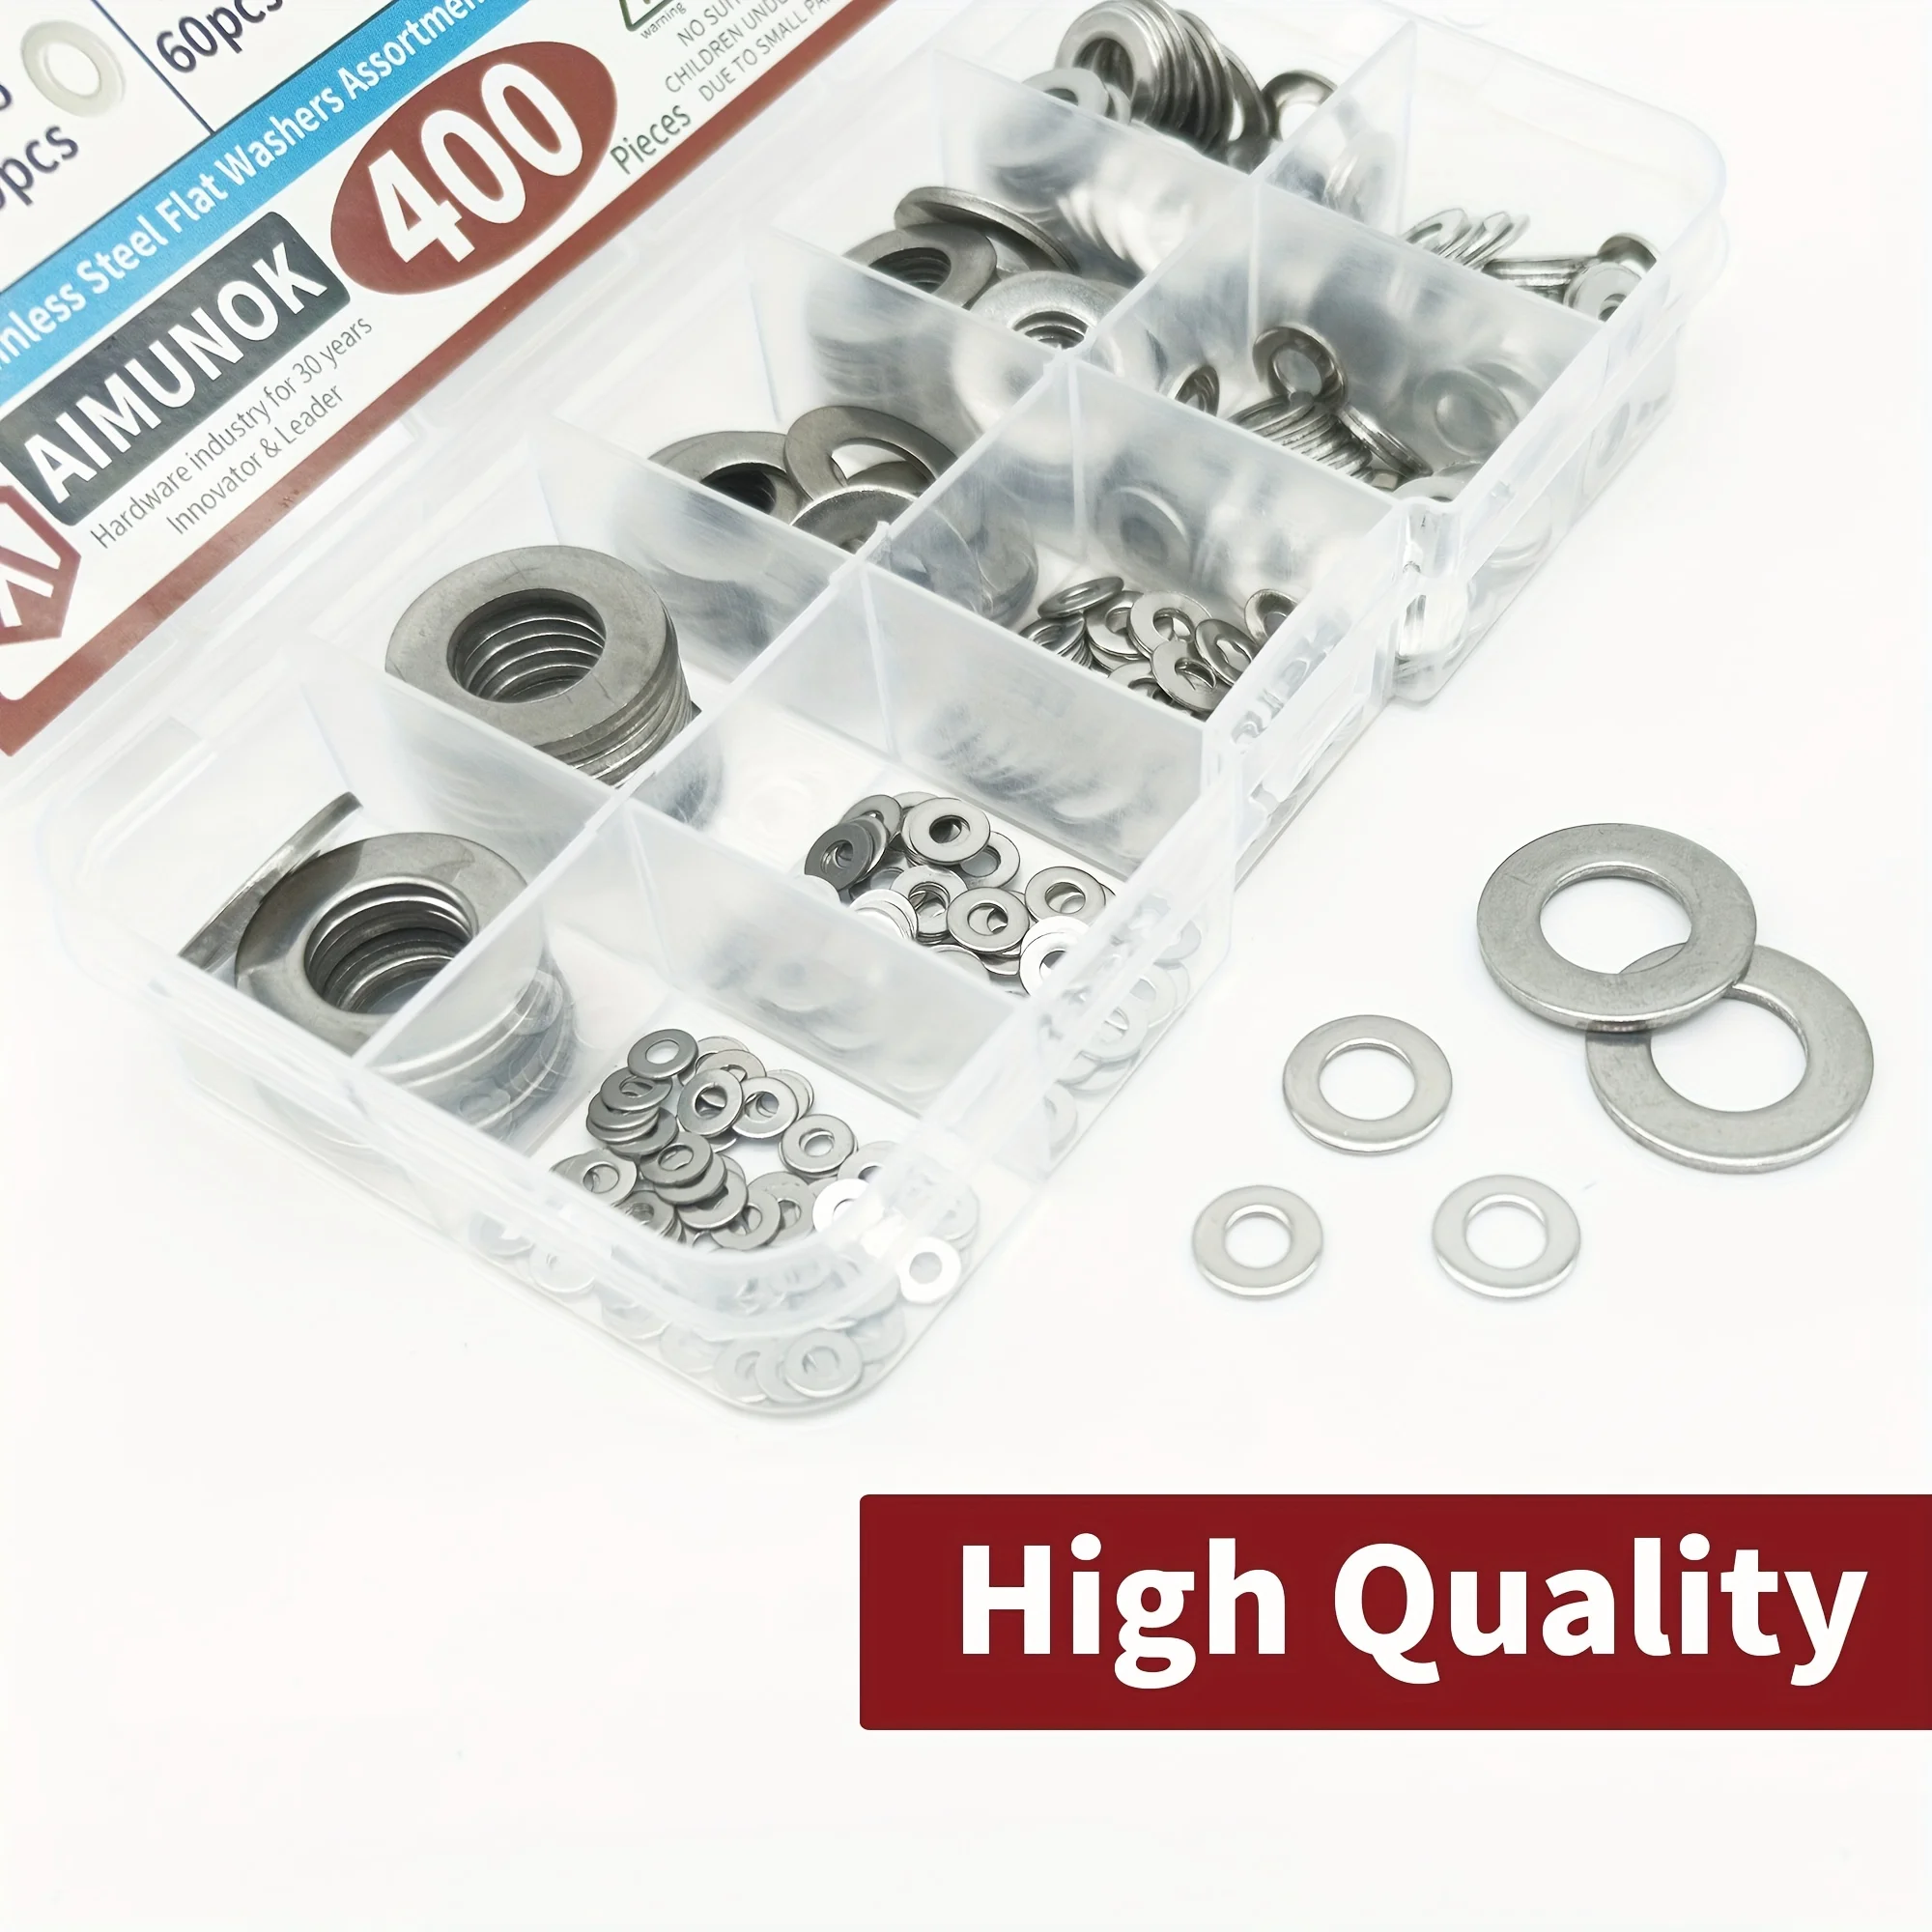 304 Stainless Steel Flat Washers Set 400 Pieces, 8 Sizes - M2 M2.5 M3 M4 M5 M6 M8 M10 Suitable for Home Decoration, Factories Re